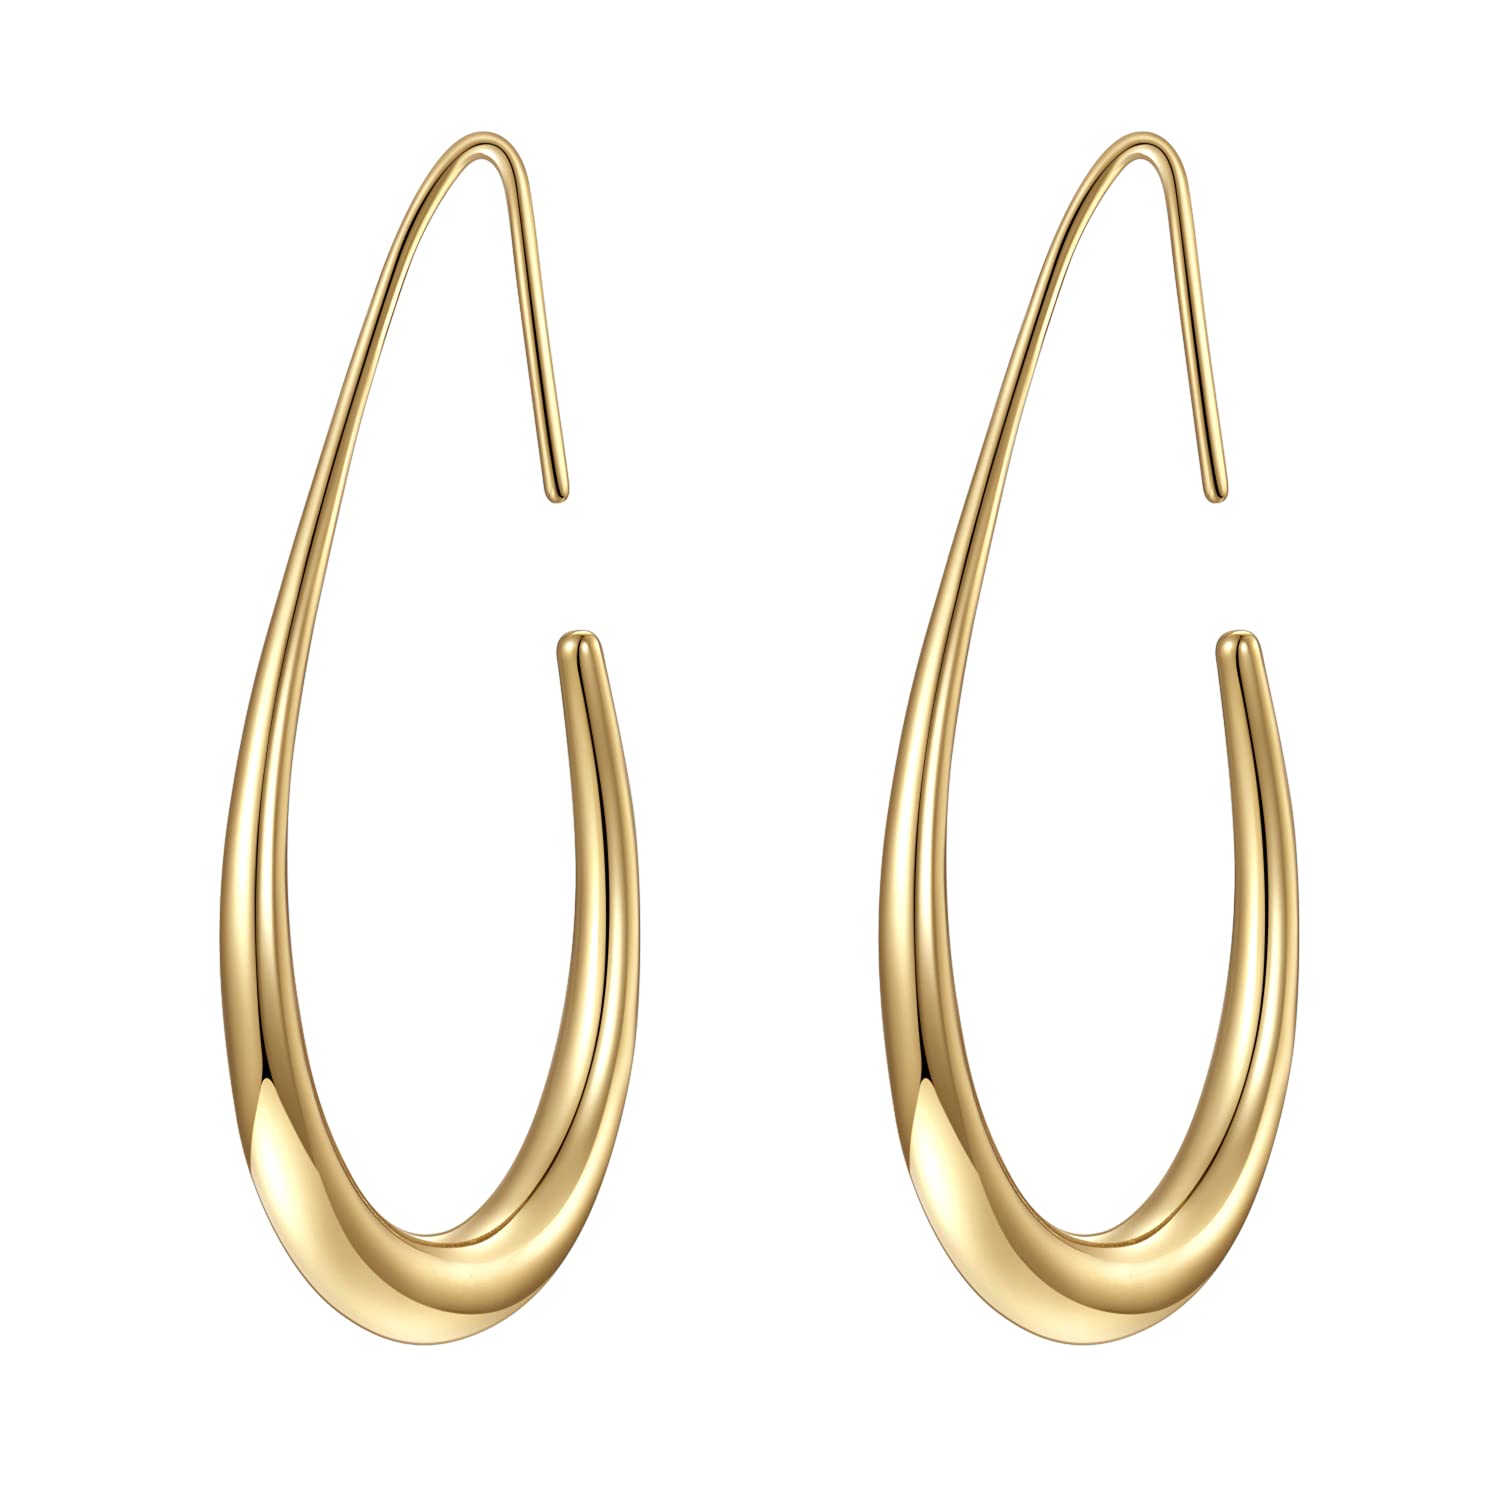 Lightweight Teardrop Hoop Earrings for Women - 14k Gold/White Gold Plated Large Oval Pull Through Hoop Earrings High Polished Statement Jewelry Gift for Women Teen Girls